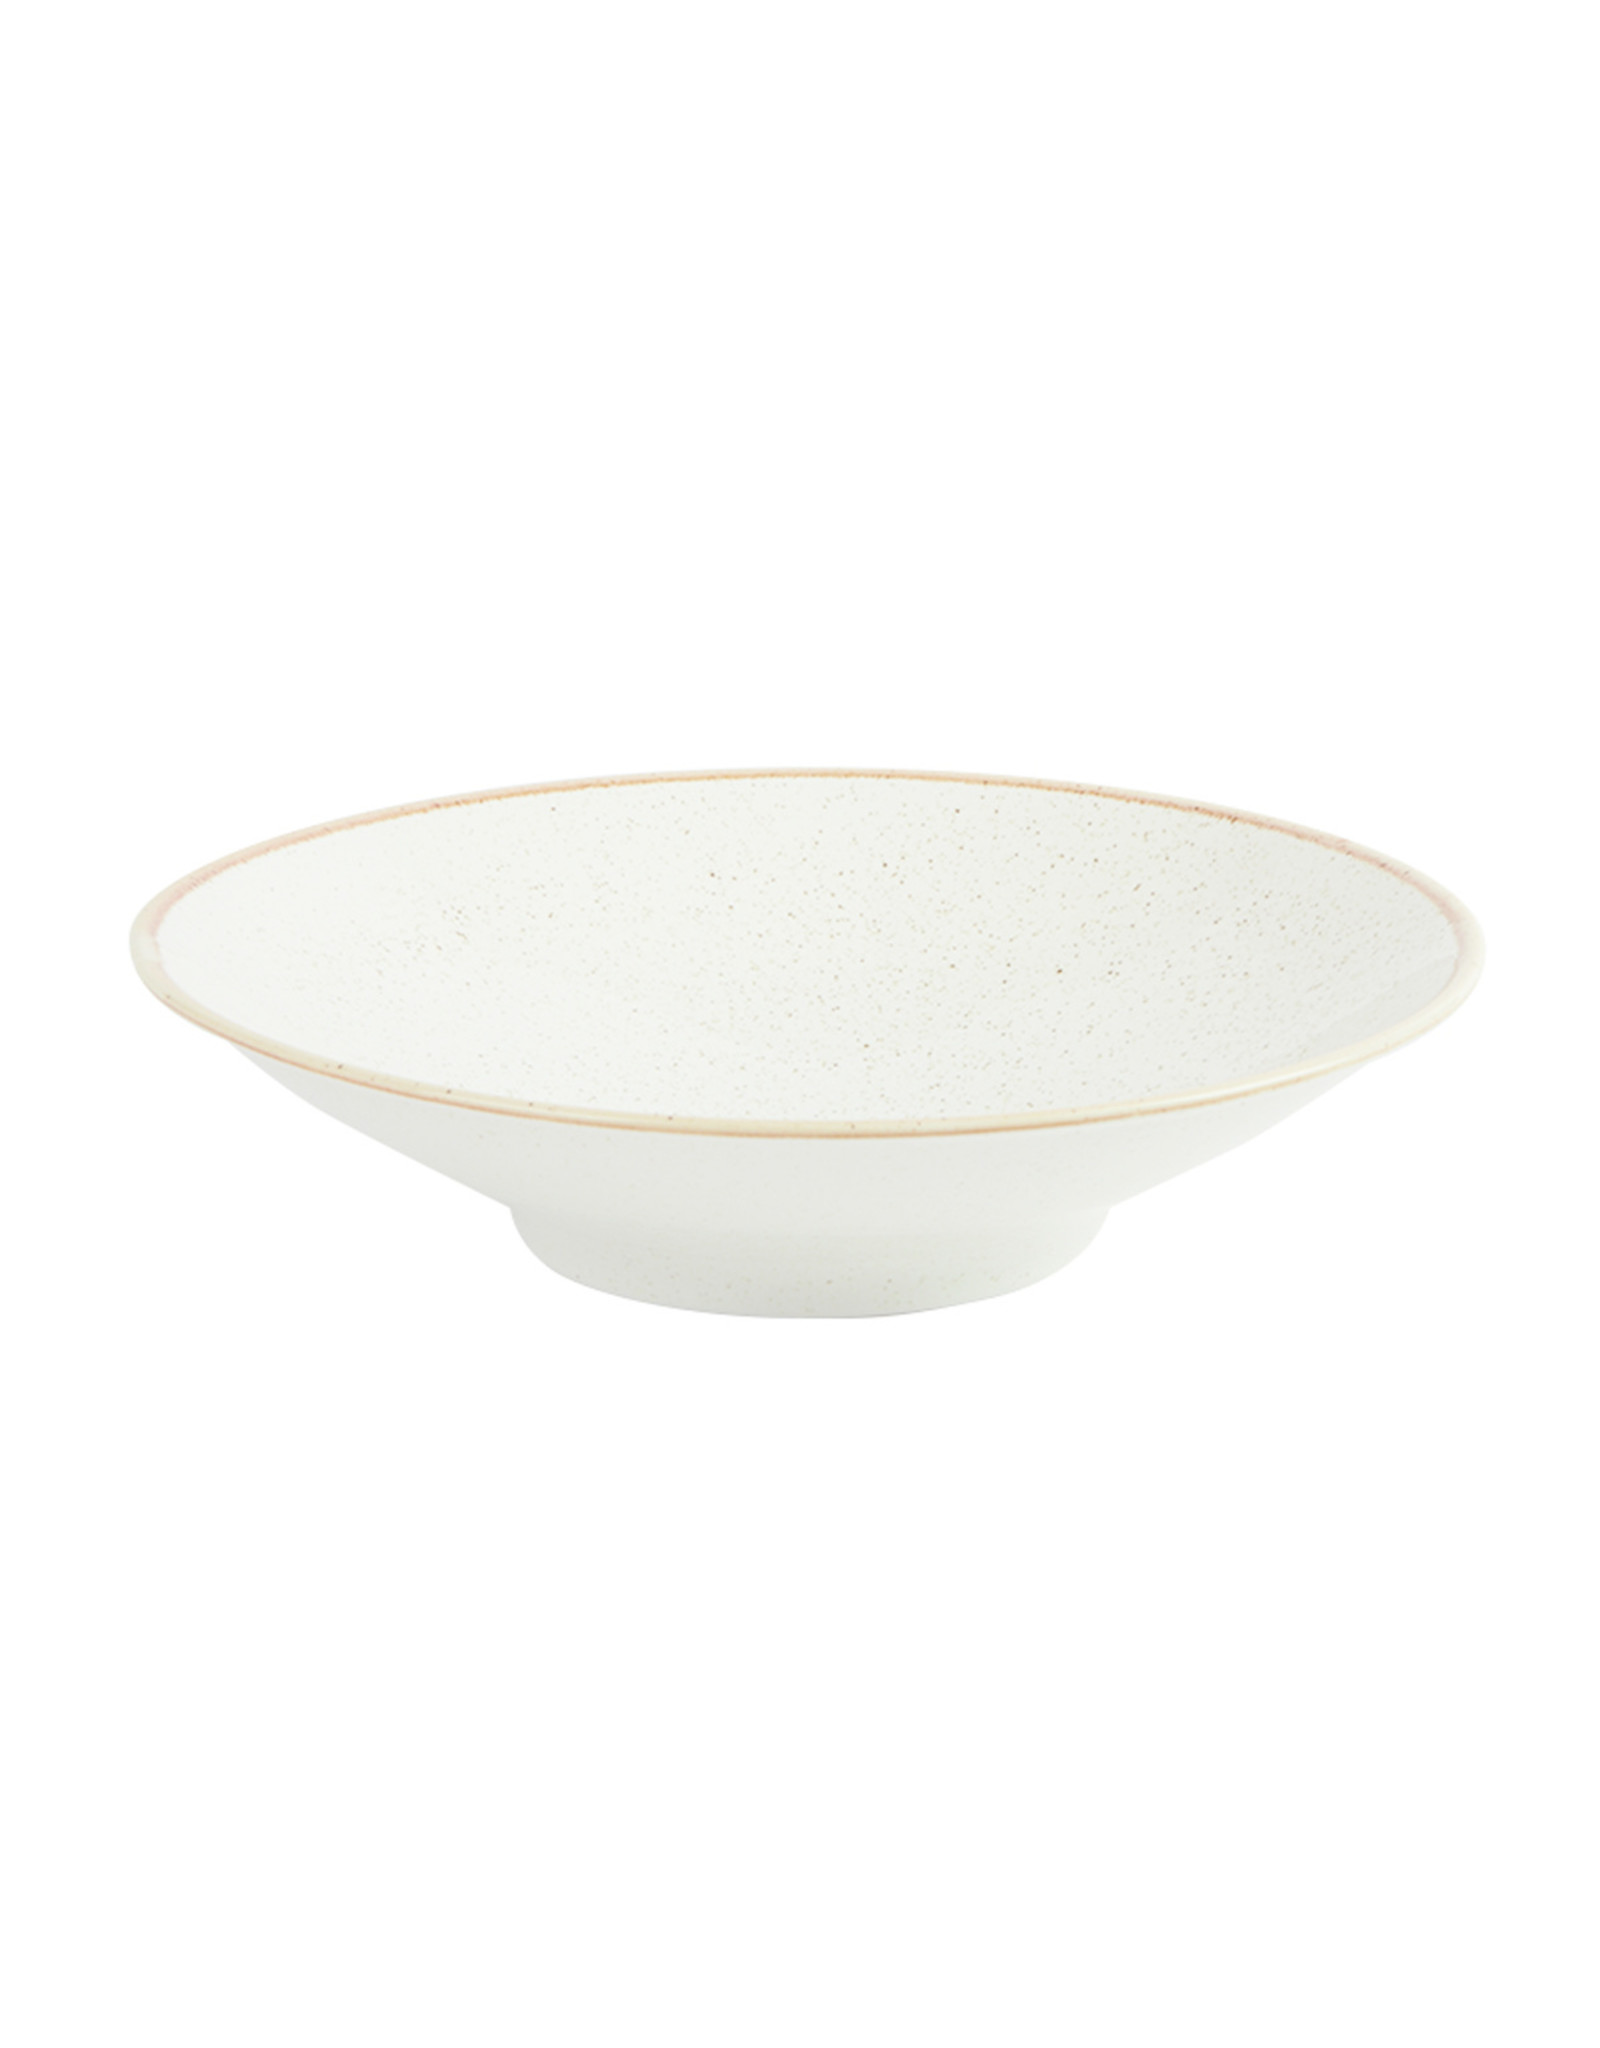 Stylepoint Footed bowl 26 cm Seasons Oatmeal